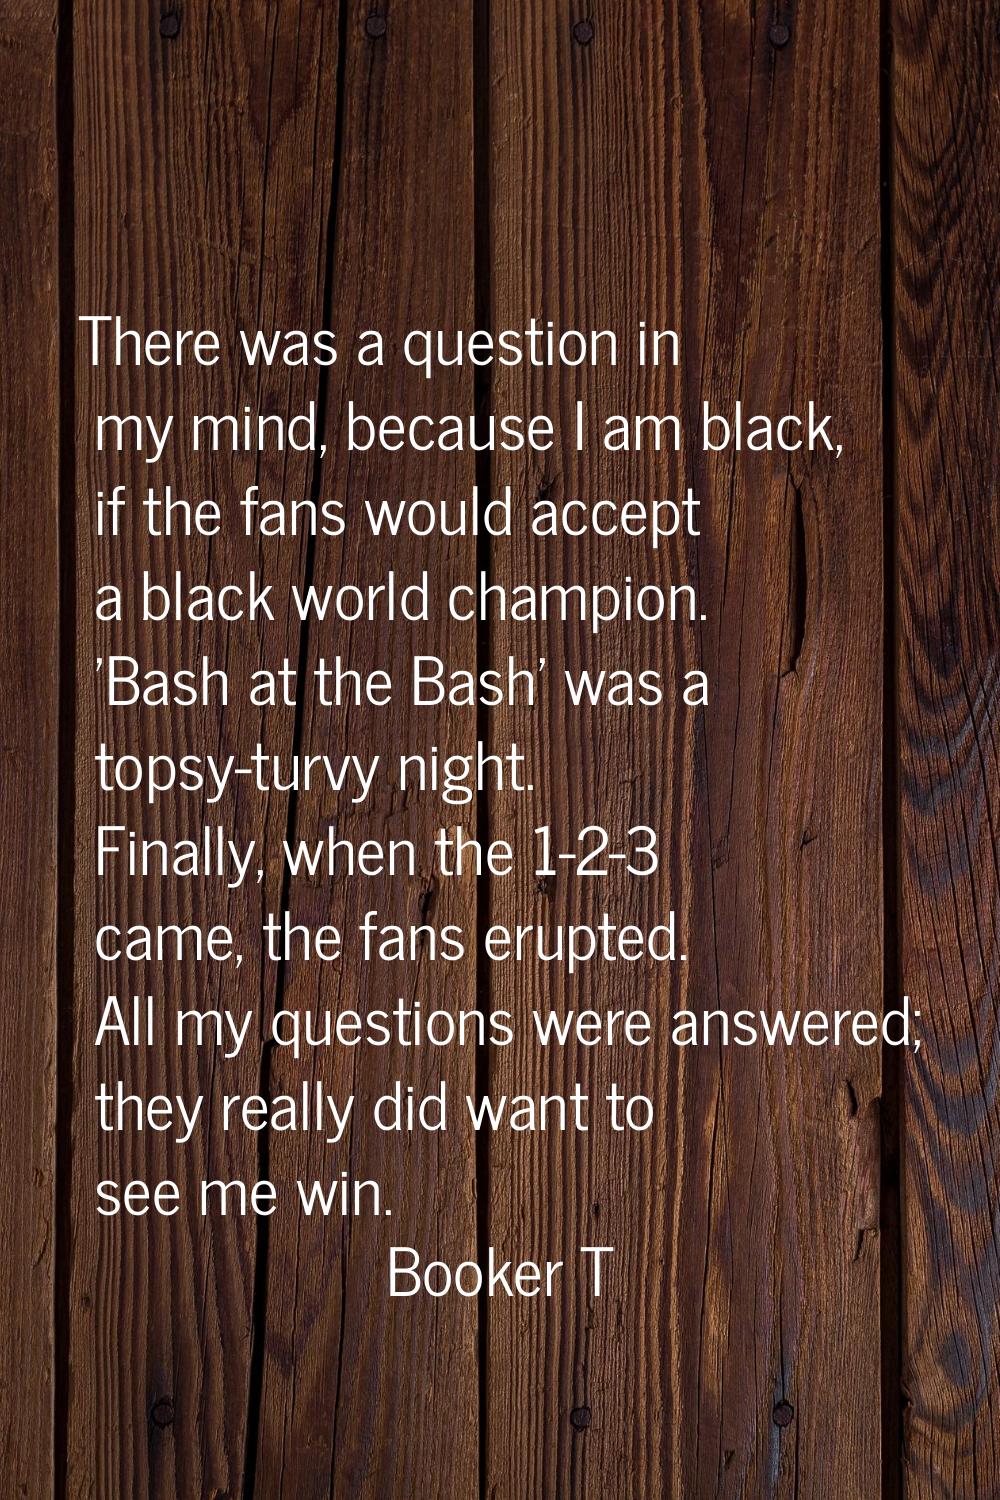 There was a question in my mind, because I am black, if the fans would accept a black world champio